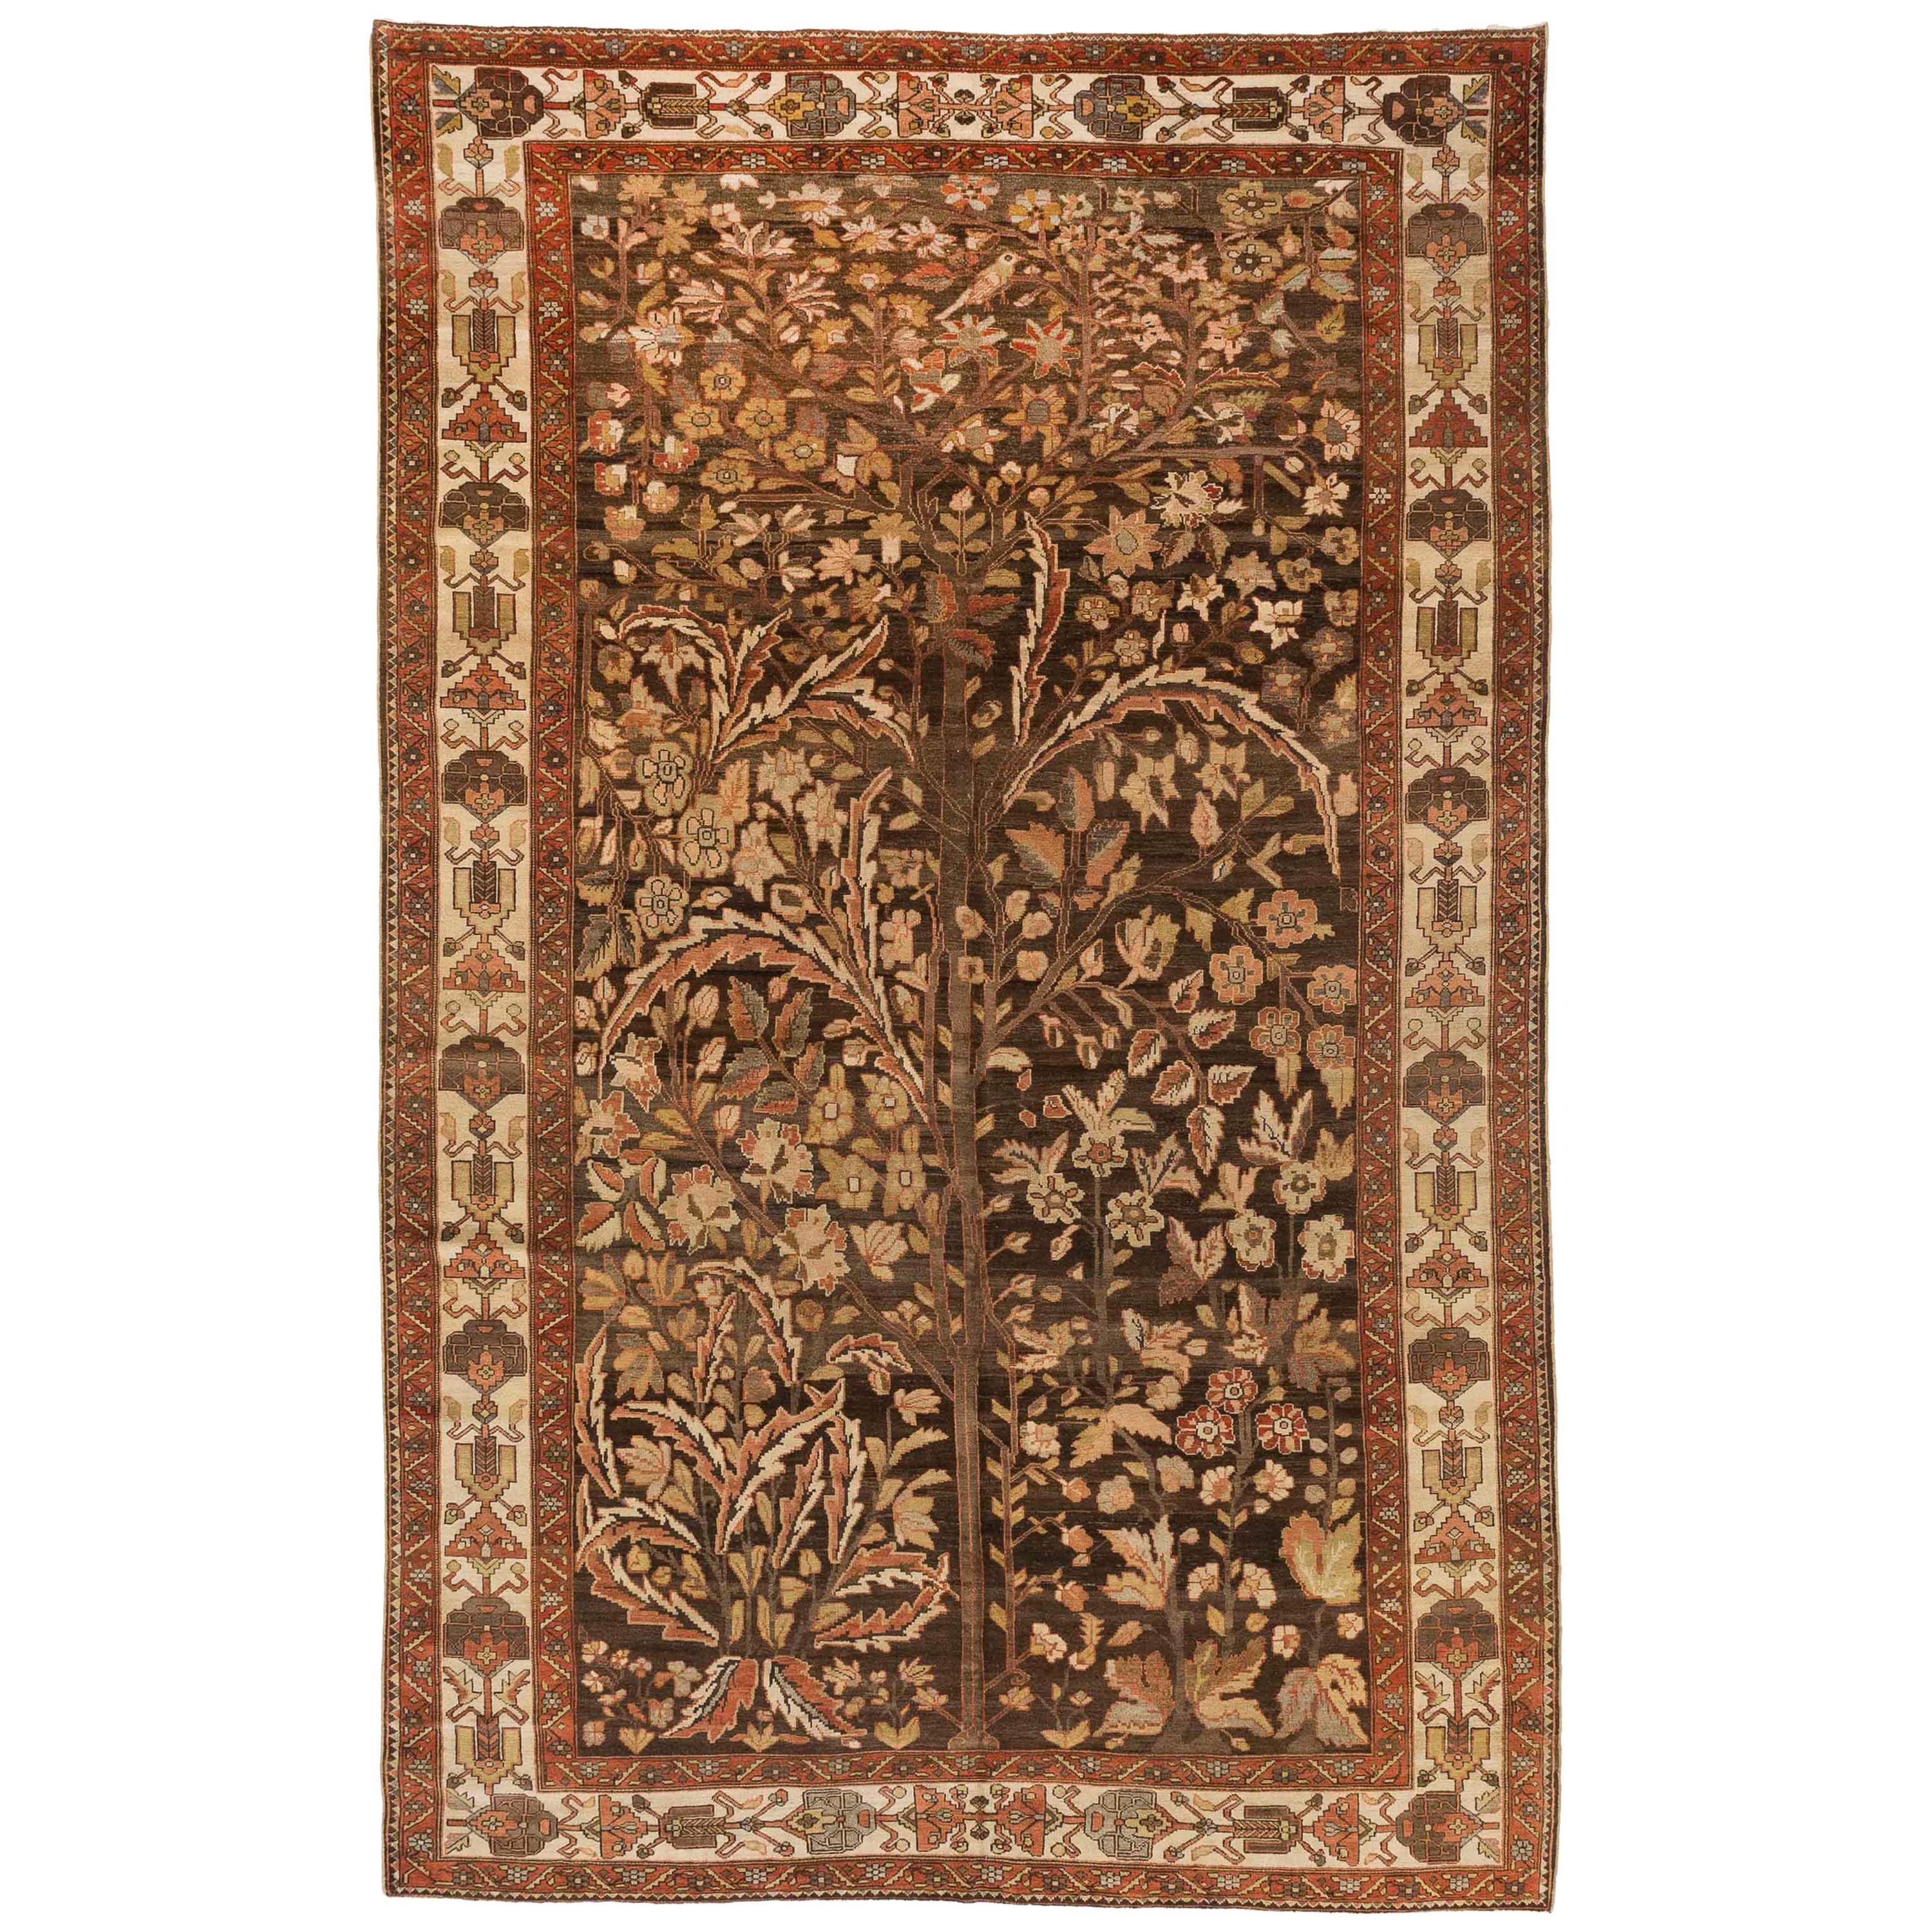 1940s Antique Persian Rug Bakhtiar Design with ‘Tree of Life’ Floral Patterns For Sale